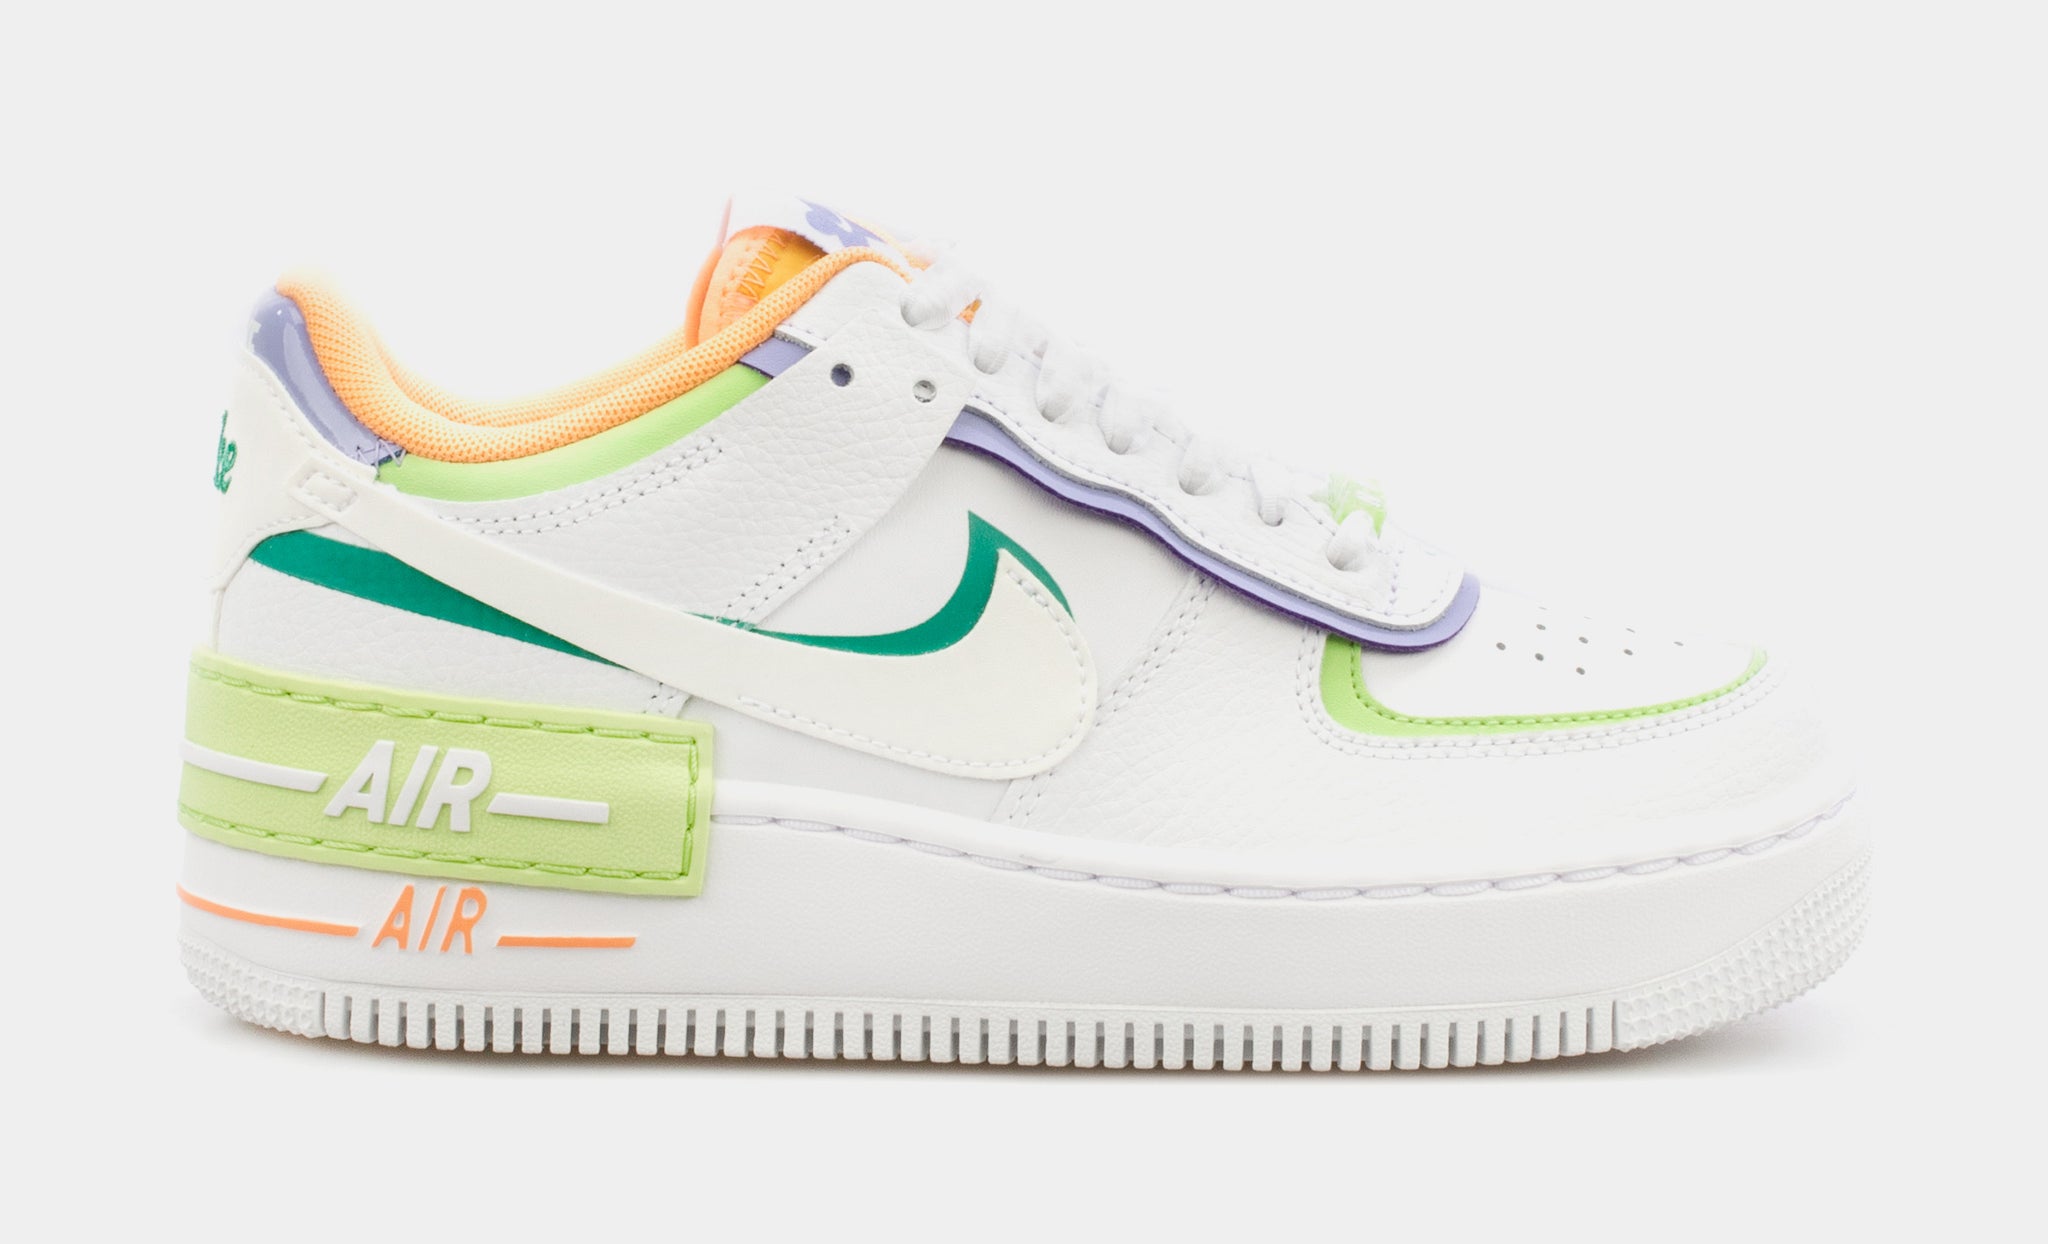 Nike Air Force 1 Shadow Neon Leather Sneakers In White